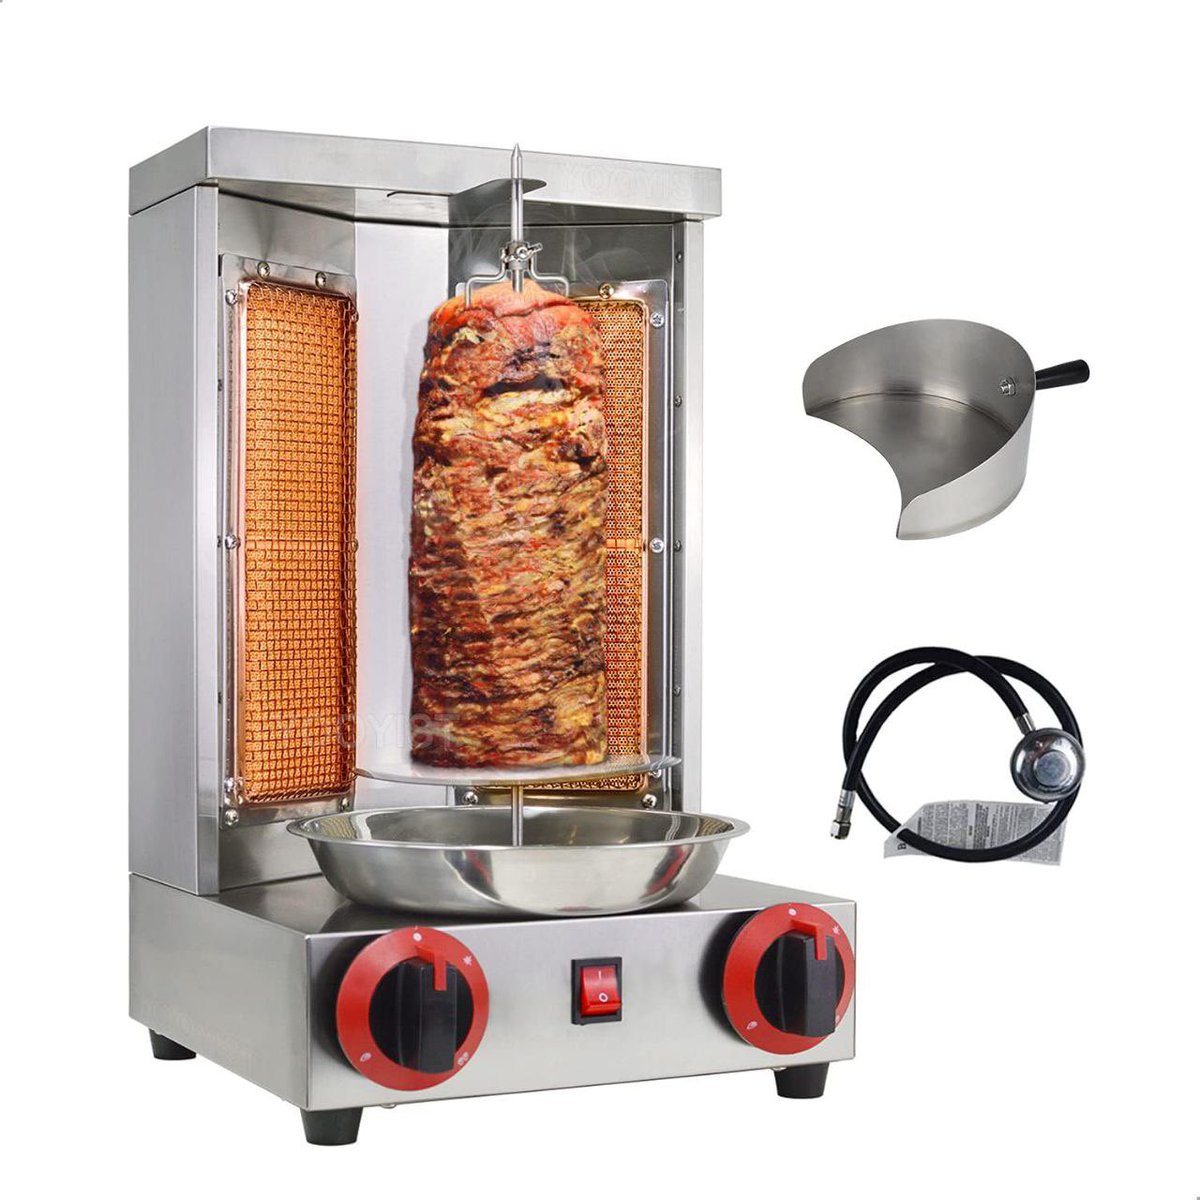 Pro shawarma grill machine 

Price: N220,000

To order, DM
WhatsApp/Call (+2347048540500)

#souveniceng
#shawarmagrill 
#shawarmagrillmachine 
#shawarmamachine 
#souvenirstore 
#souvenirstoreinlagos 
#souvenirstoresinlagos